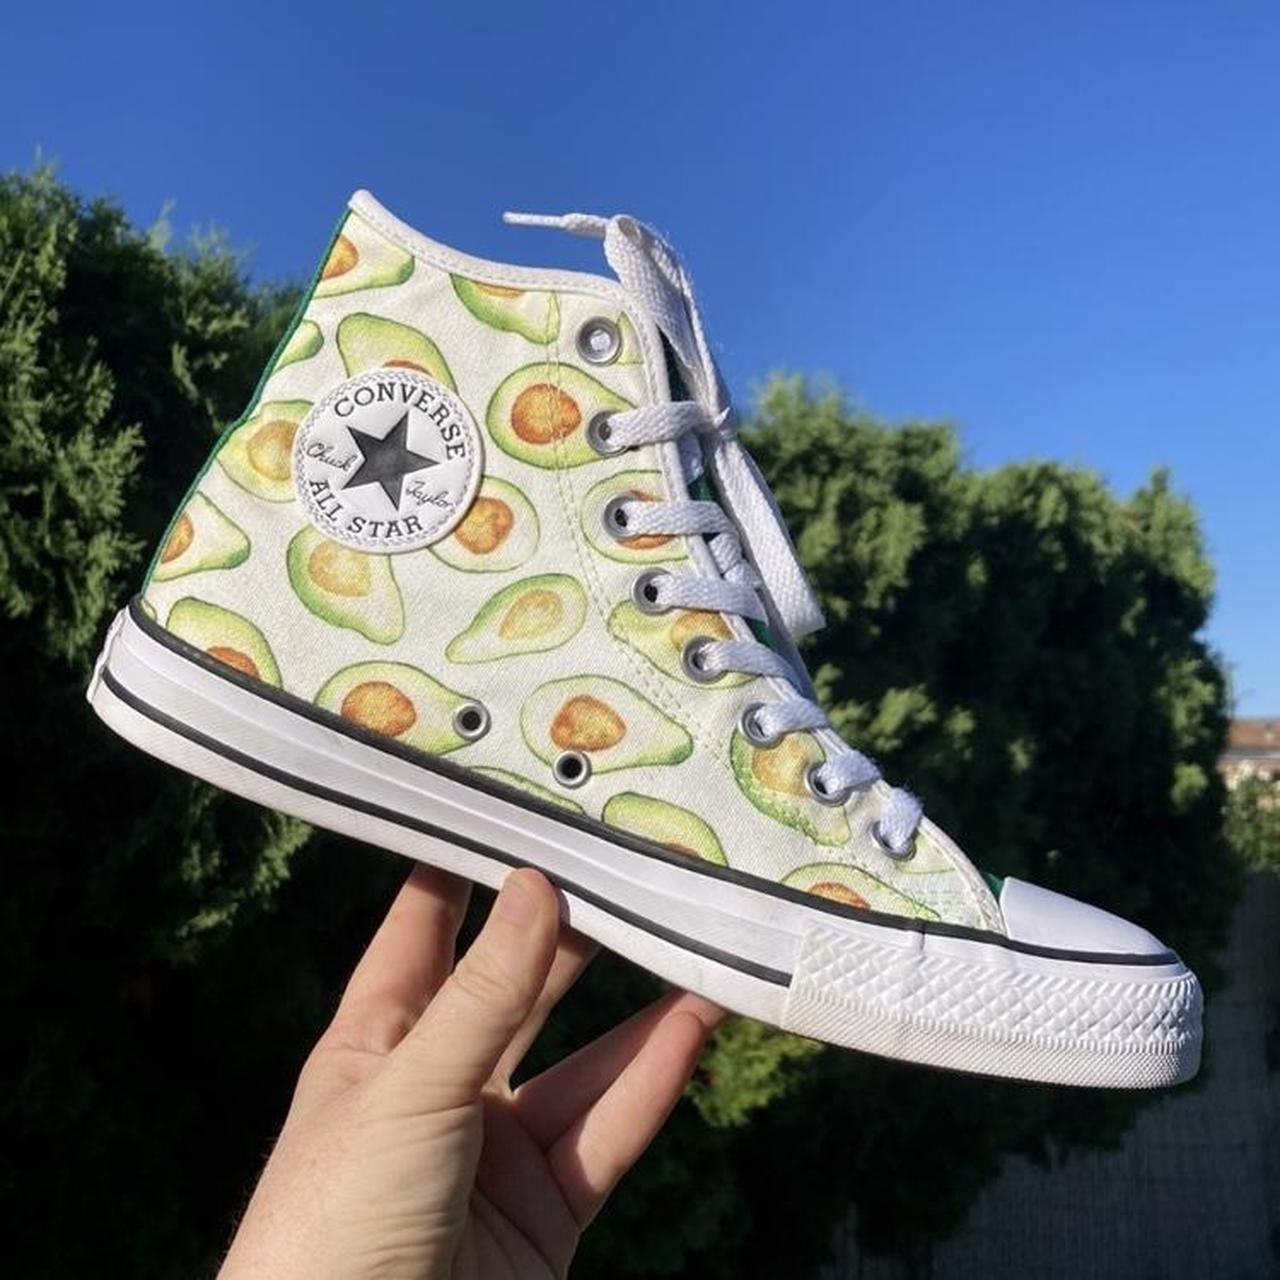 Converse Women's Green and White Trainers | Depop